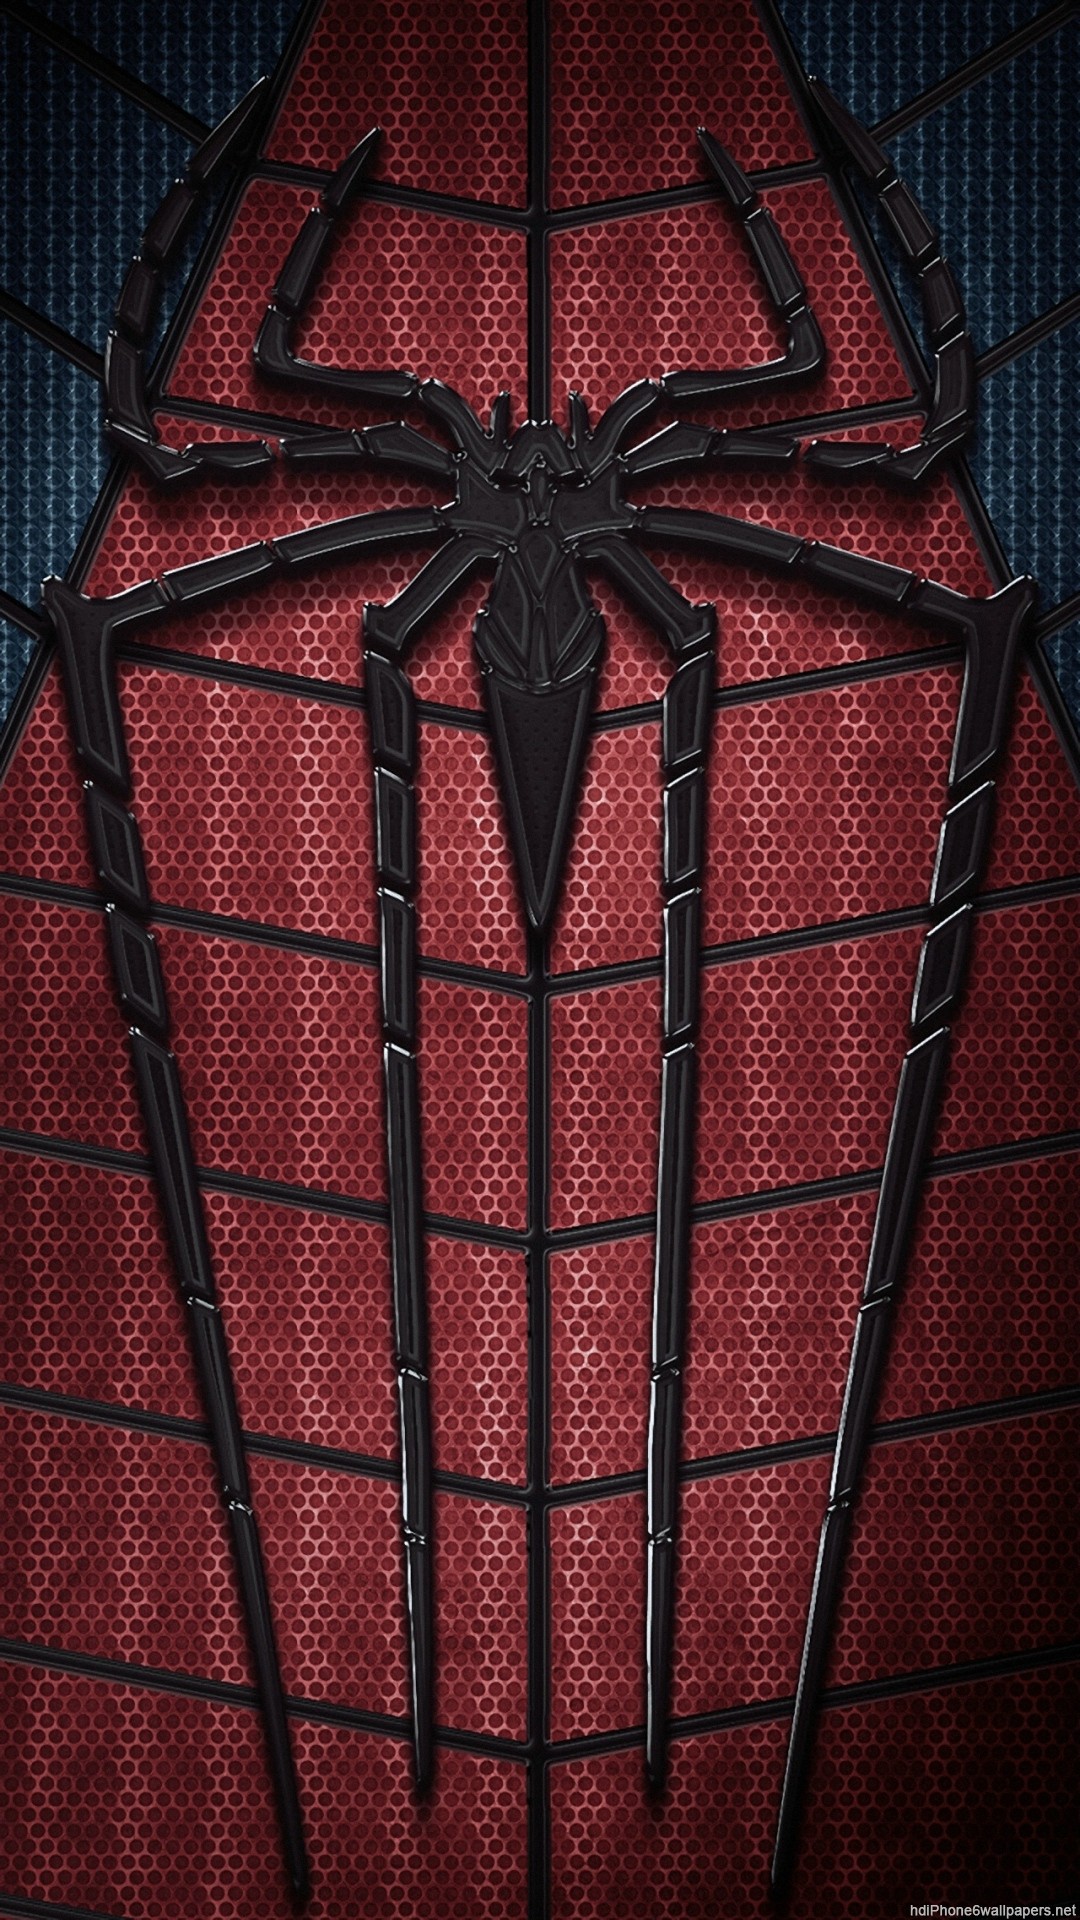 The Amazing Spider Man 2014 Iphone 6 Wallpapers Hd - Iphone 6 Wallpaper  Spiderman - 1080x1920 Wallpaper 